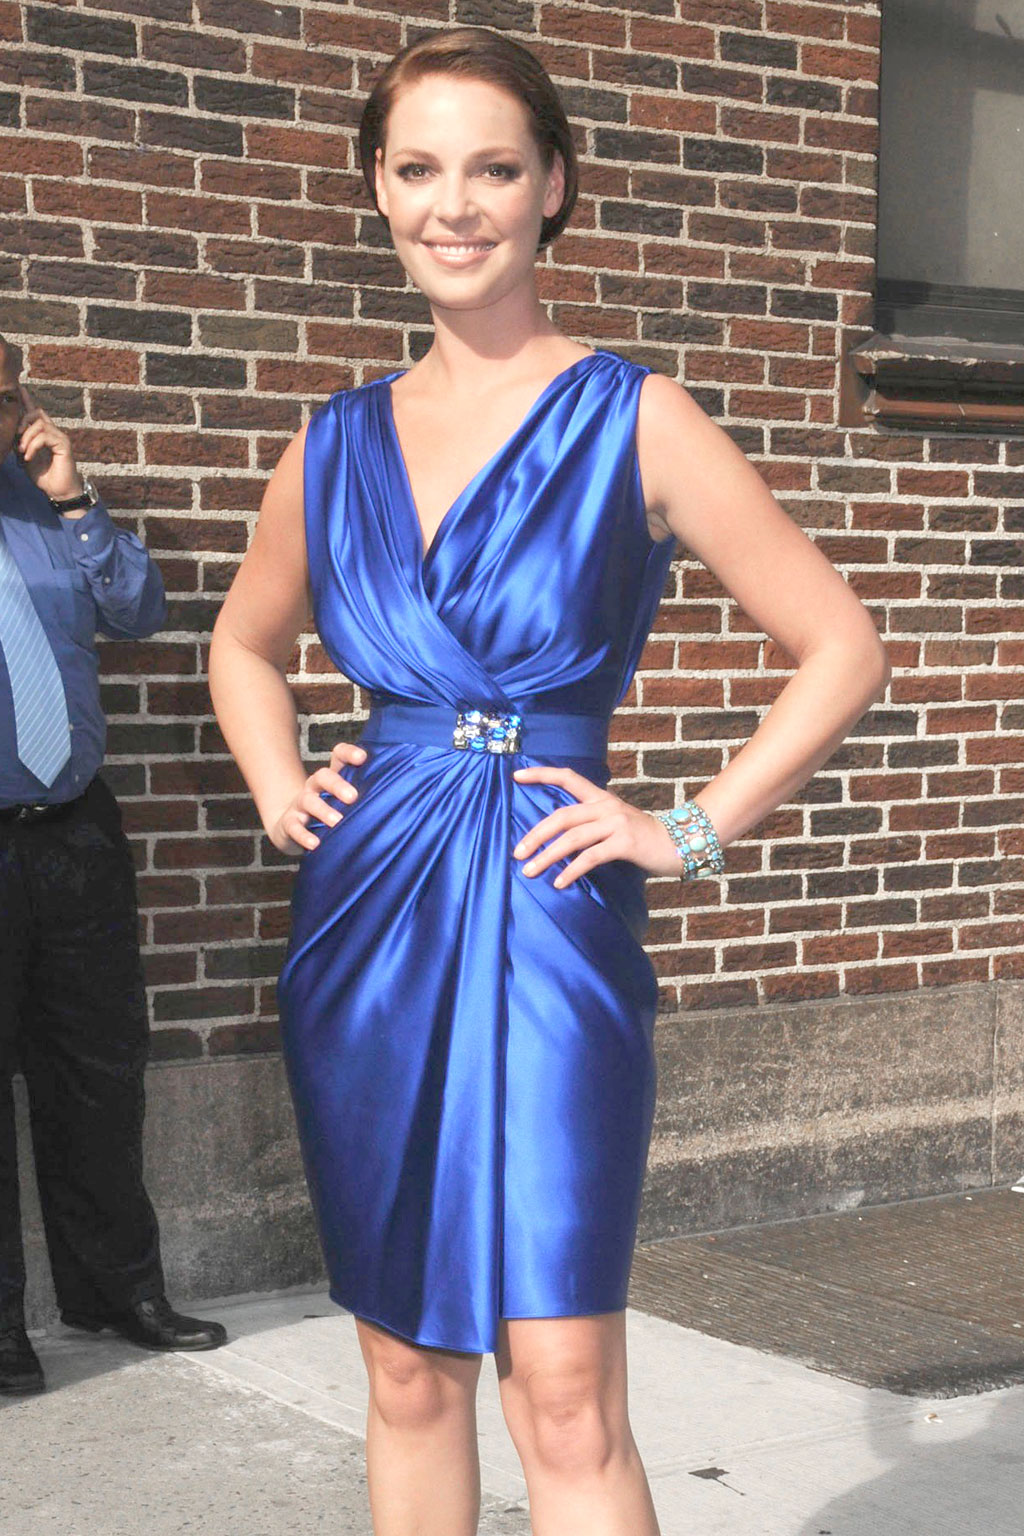 Katherine Heigl at the LATE SHOW WITH DAVID LETTERMAN on July 20, 2009 at the Ed Sullivan Theater, NY 